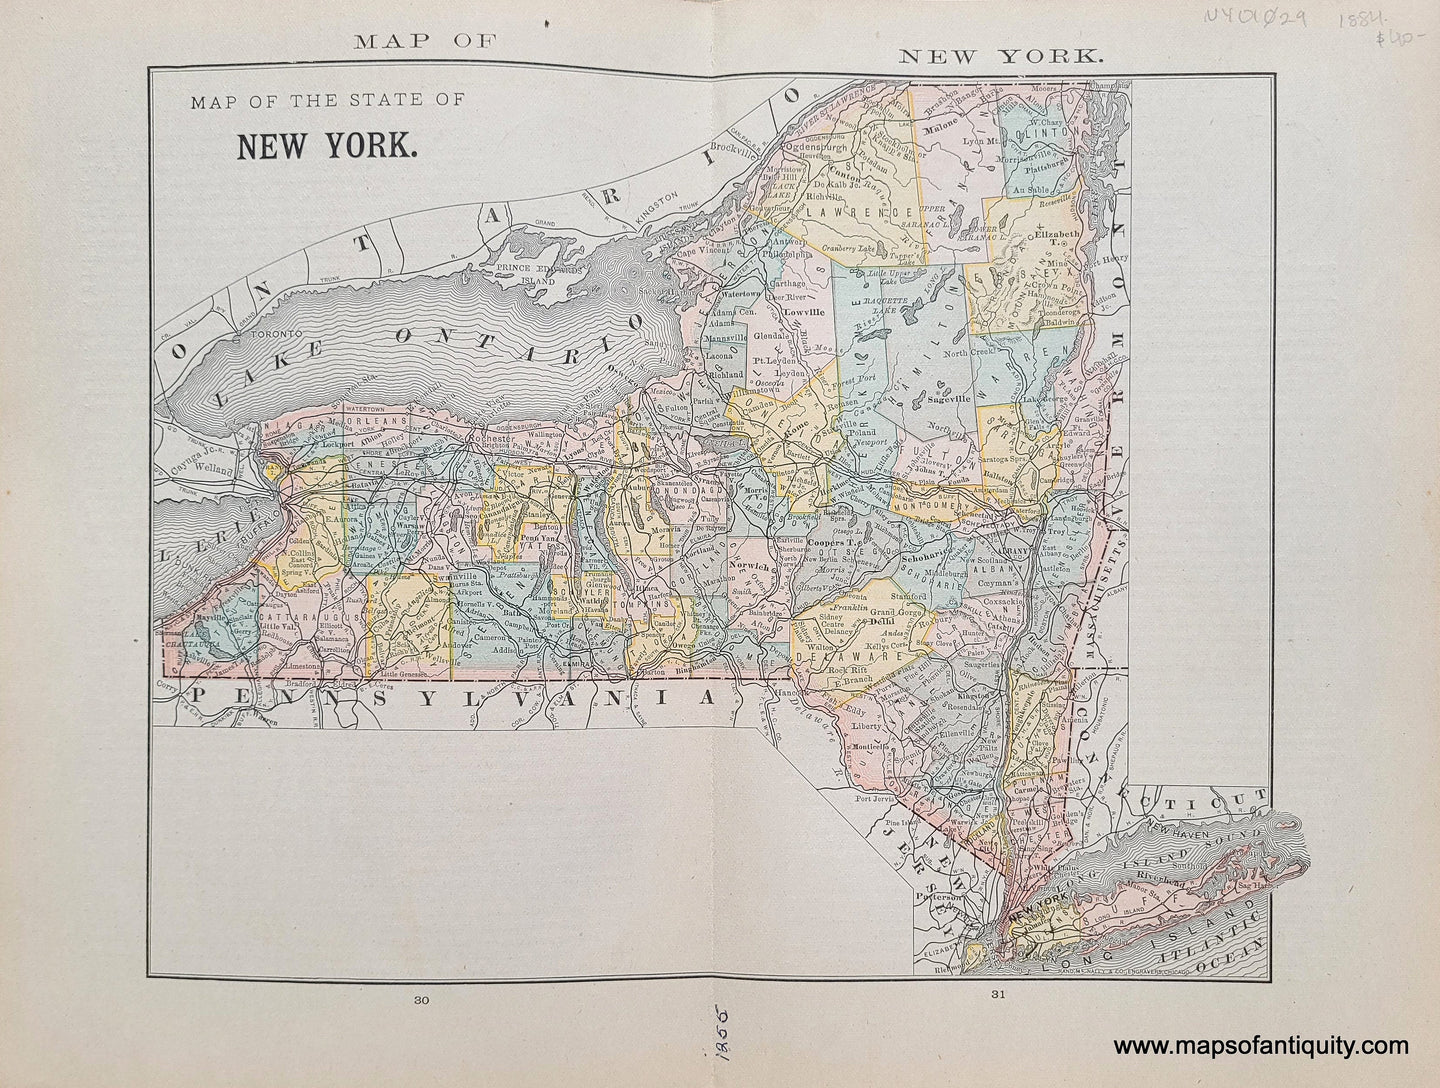 Genuine Antique Map-Map of the State of New York-1884-Rand McNally & Co-Maps-Of-Antiquity